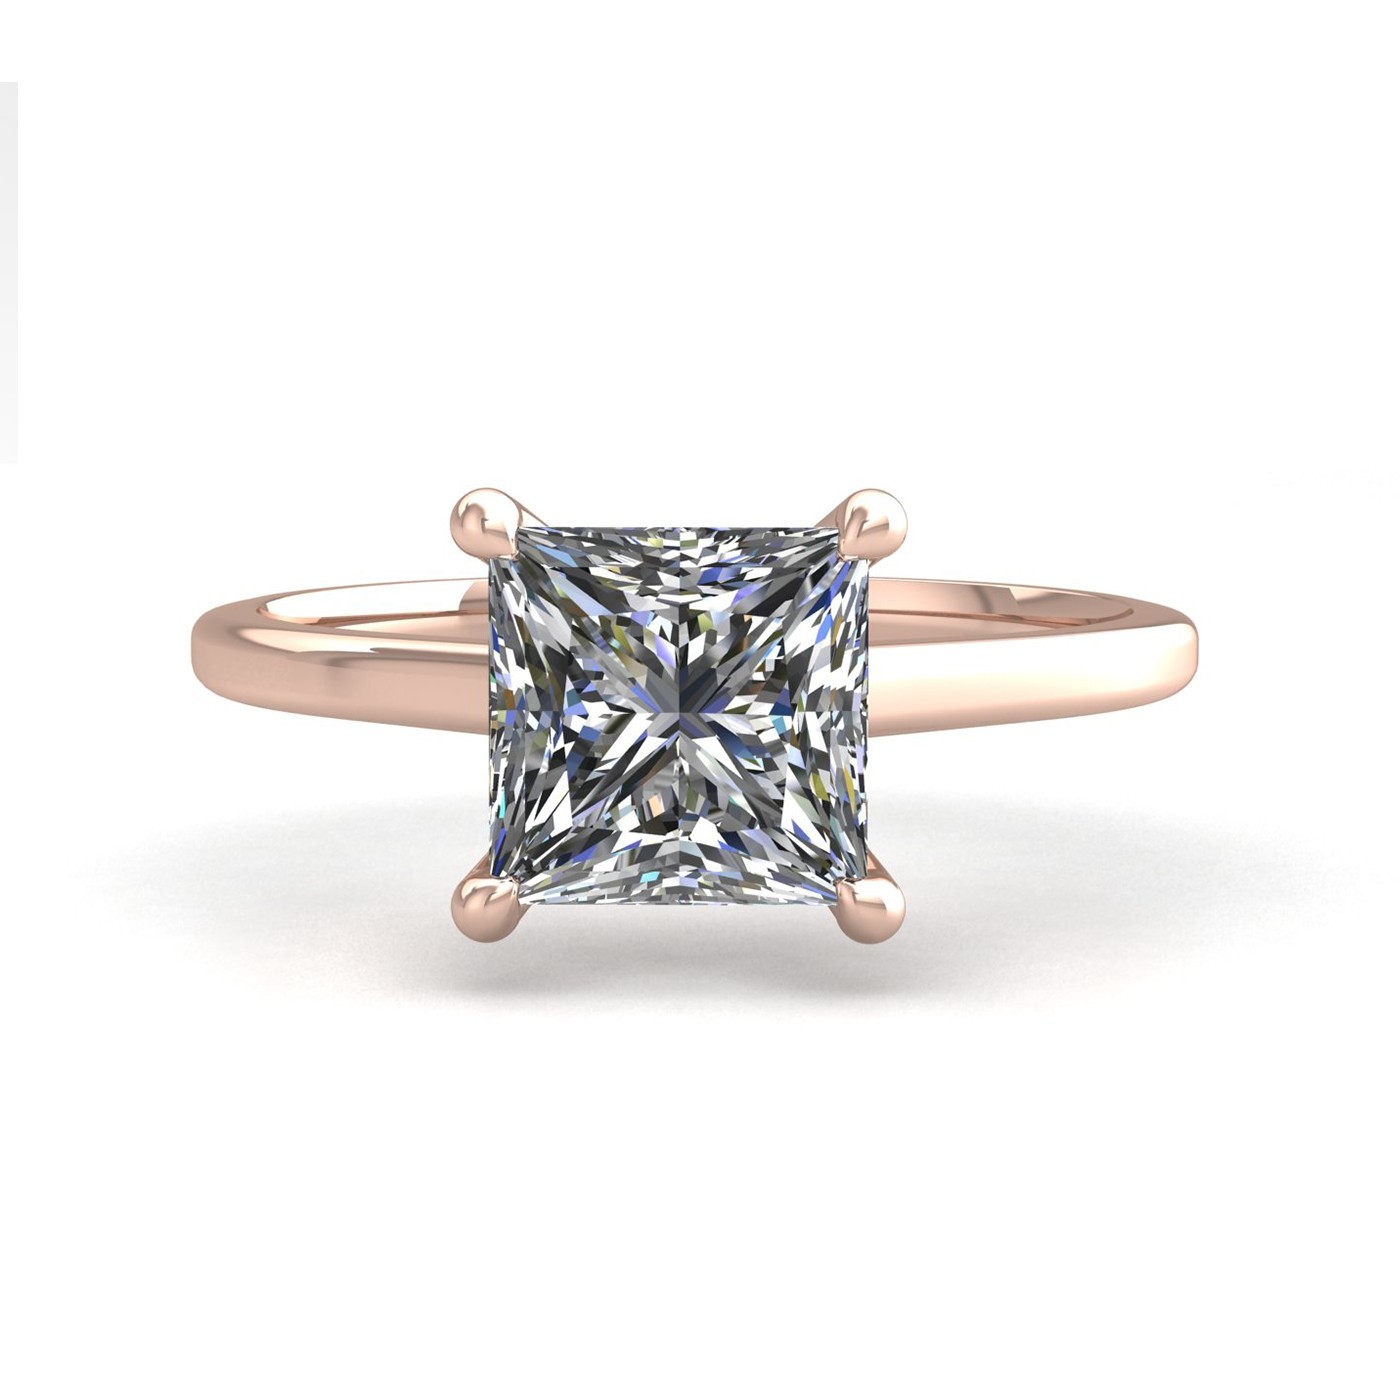 18k rose gold  1,00 ct 4 prongs solitaire princess cut diamond engagement ring with whisper thin band Photos & images